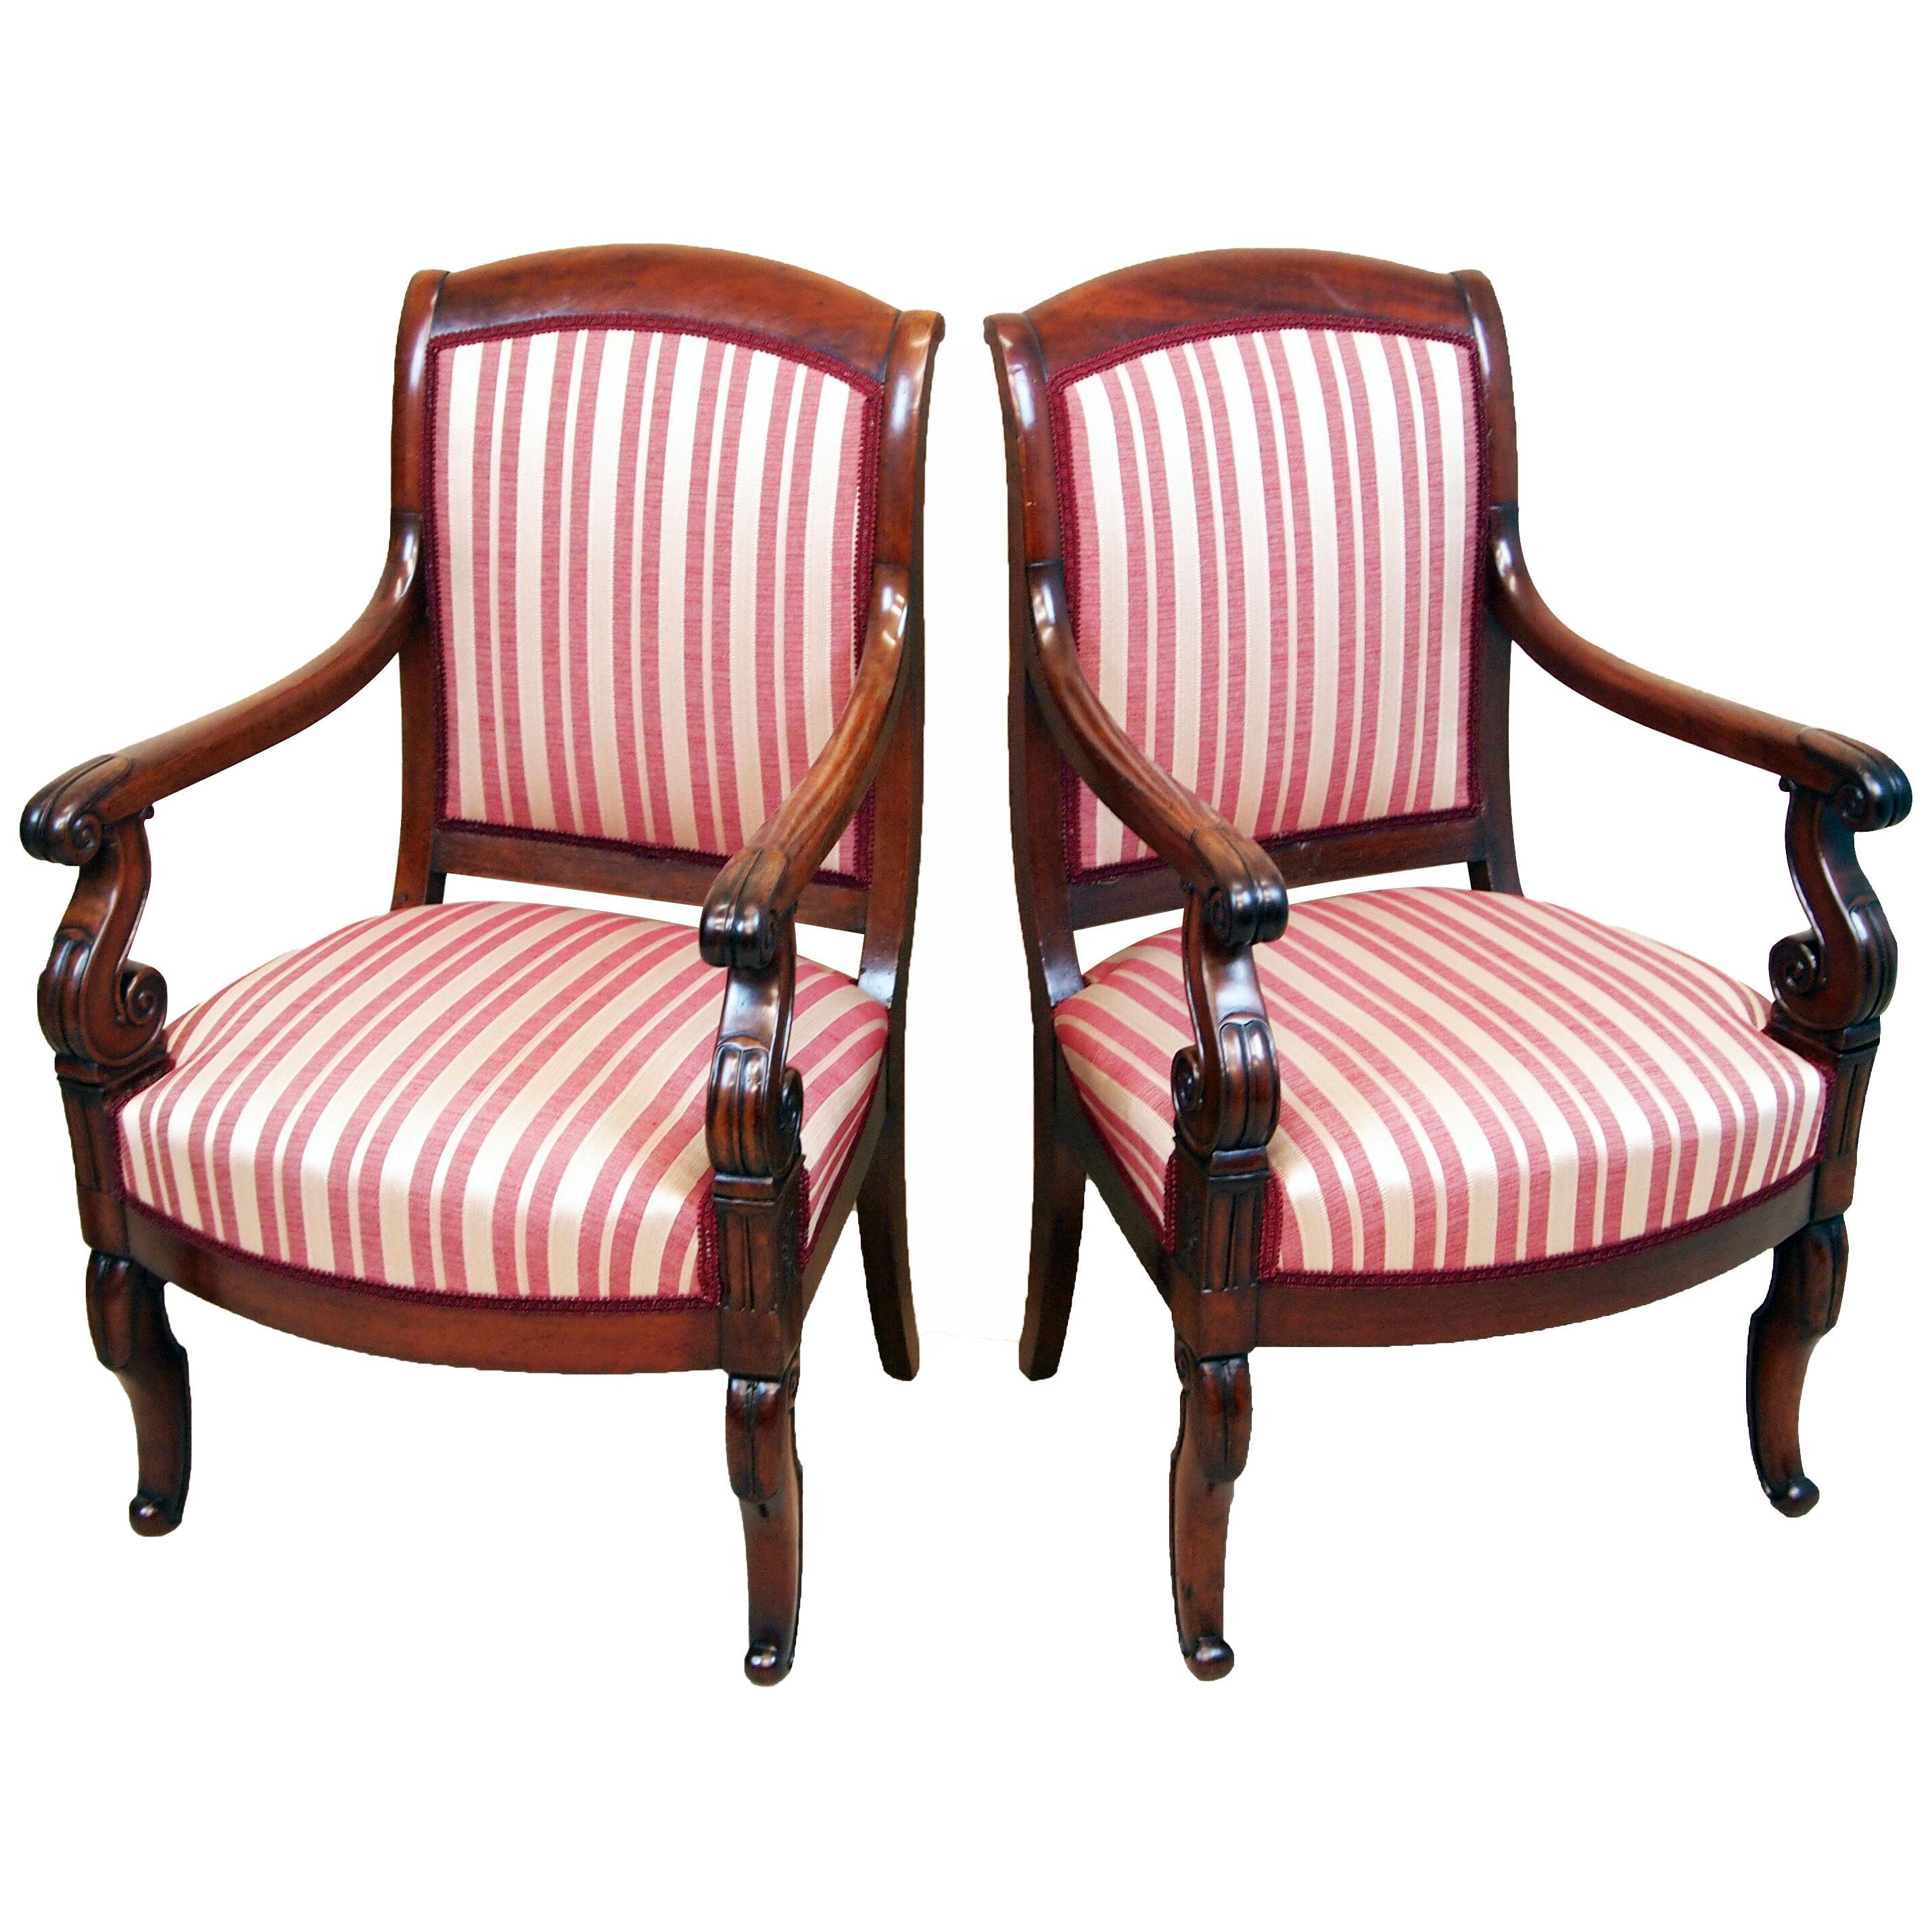 Pair of 19th Century French Empire Mahogany Library Chairs